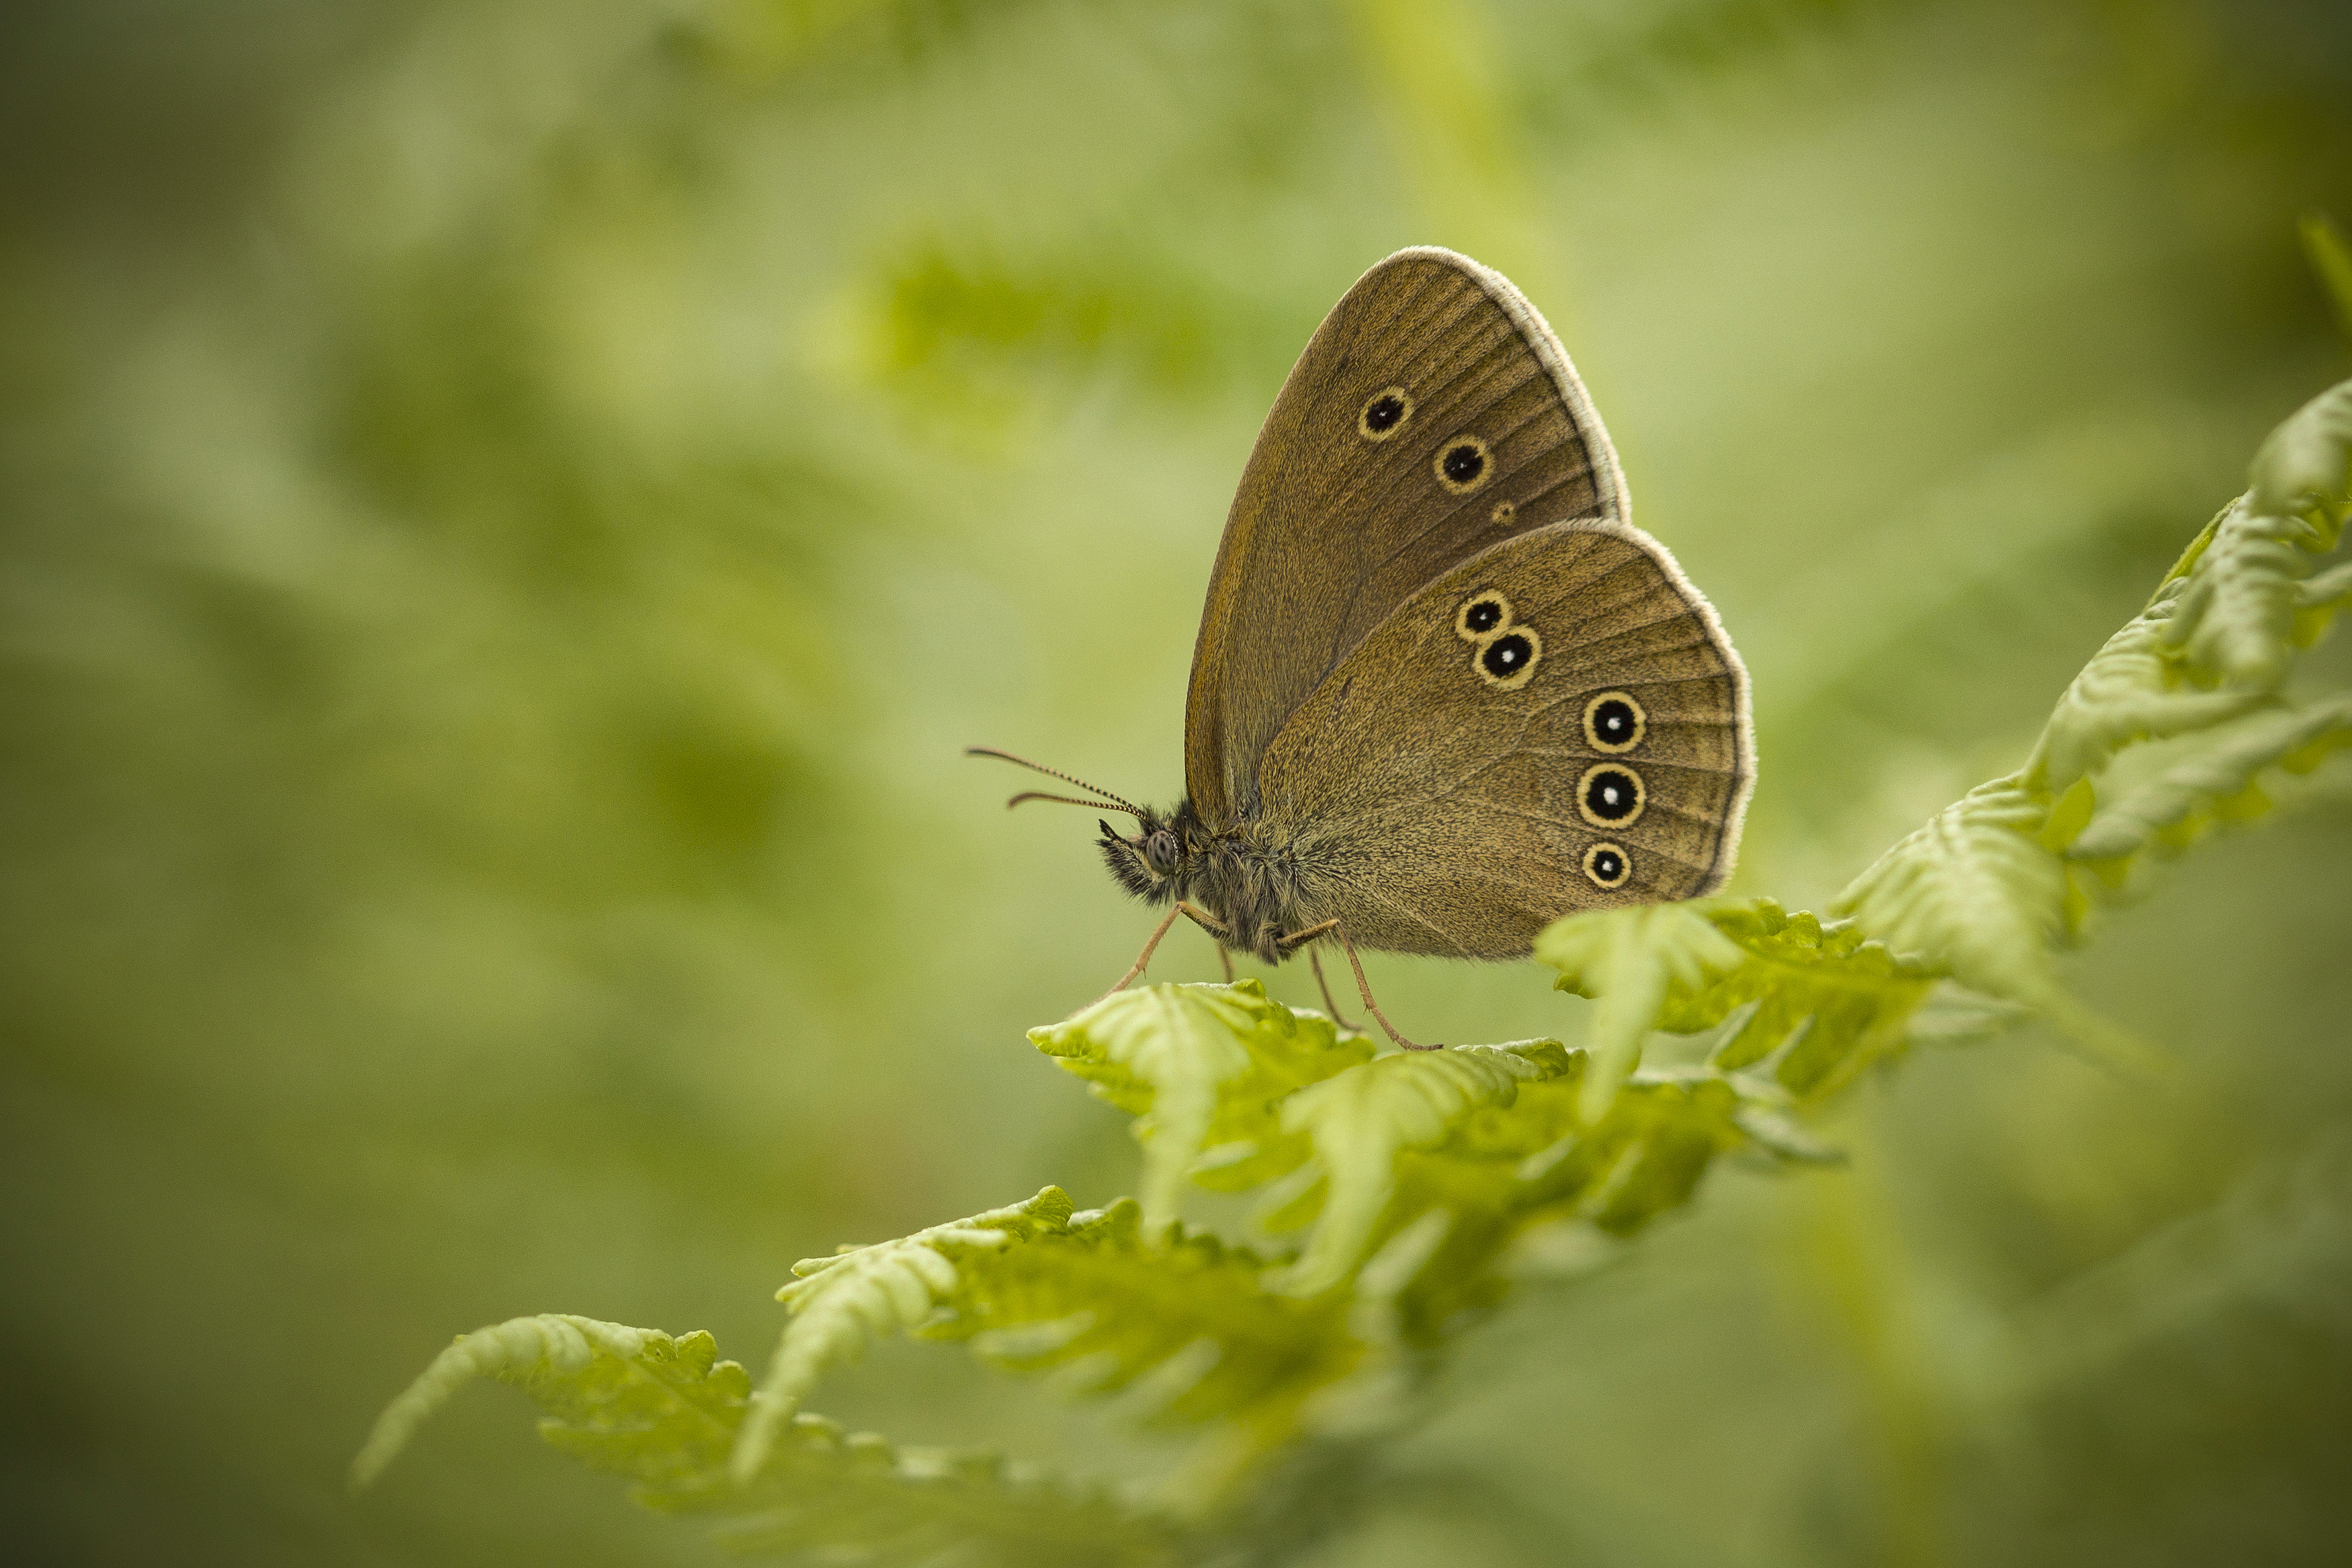 Butterfly, Nature, Insect, Close-up, Wildlife, Animal, Plant, Butterfly, Cyfka, Bokeh, Macro, Macrophotography, Damian Cyfka